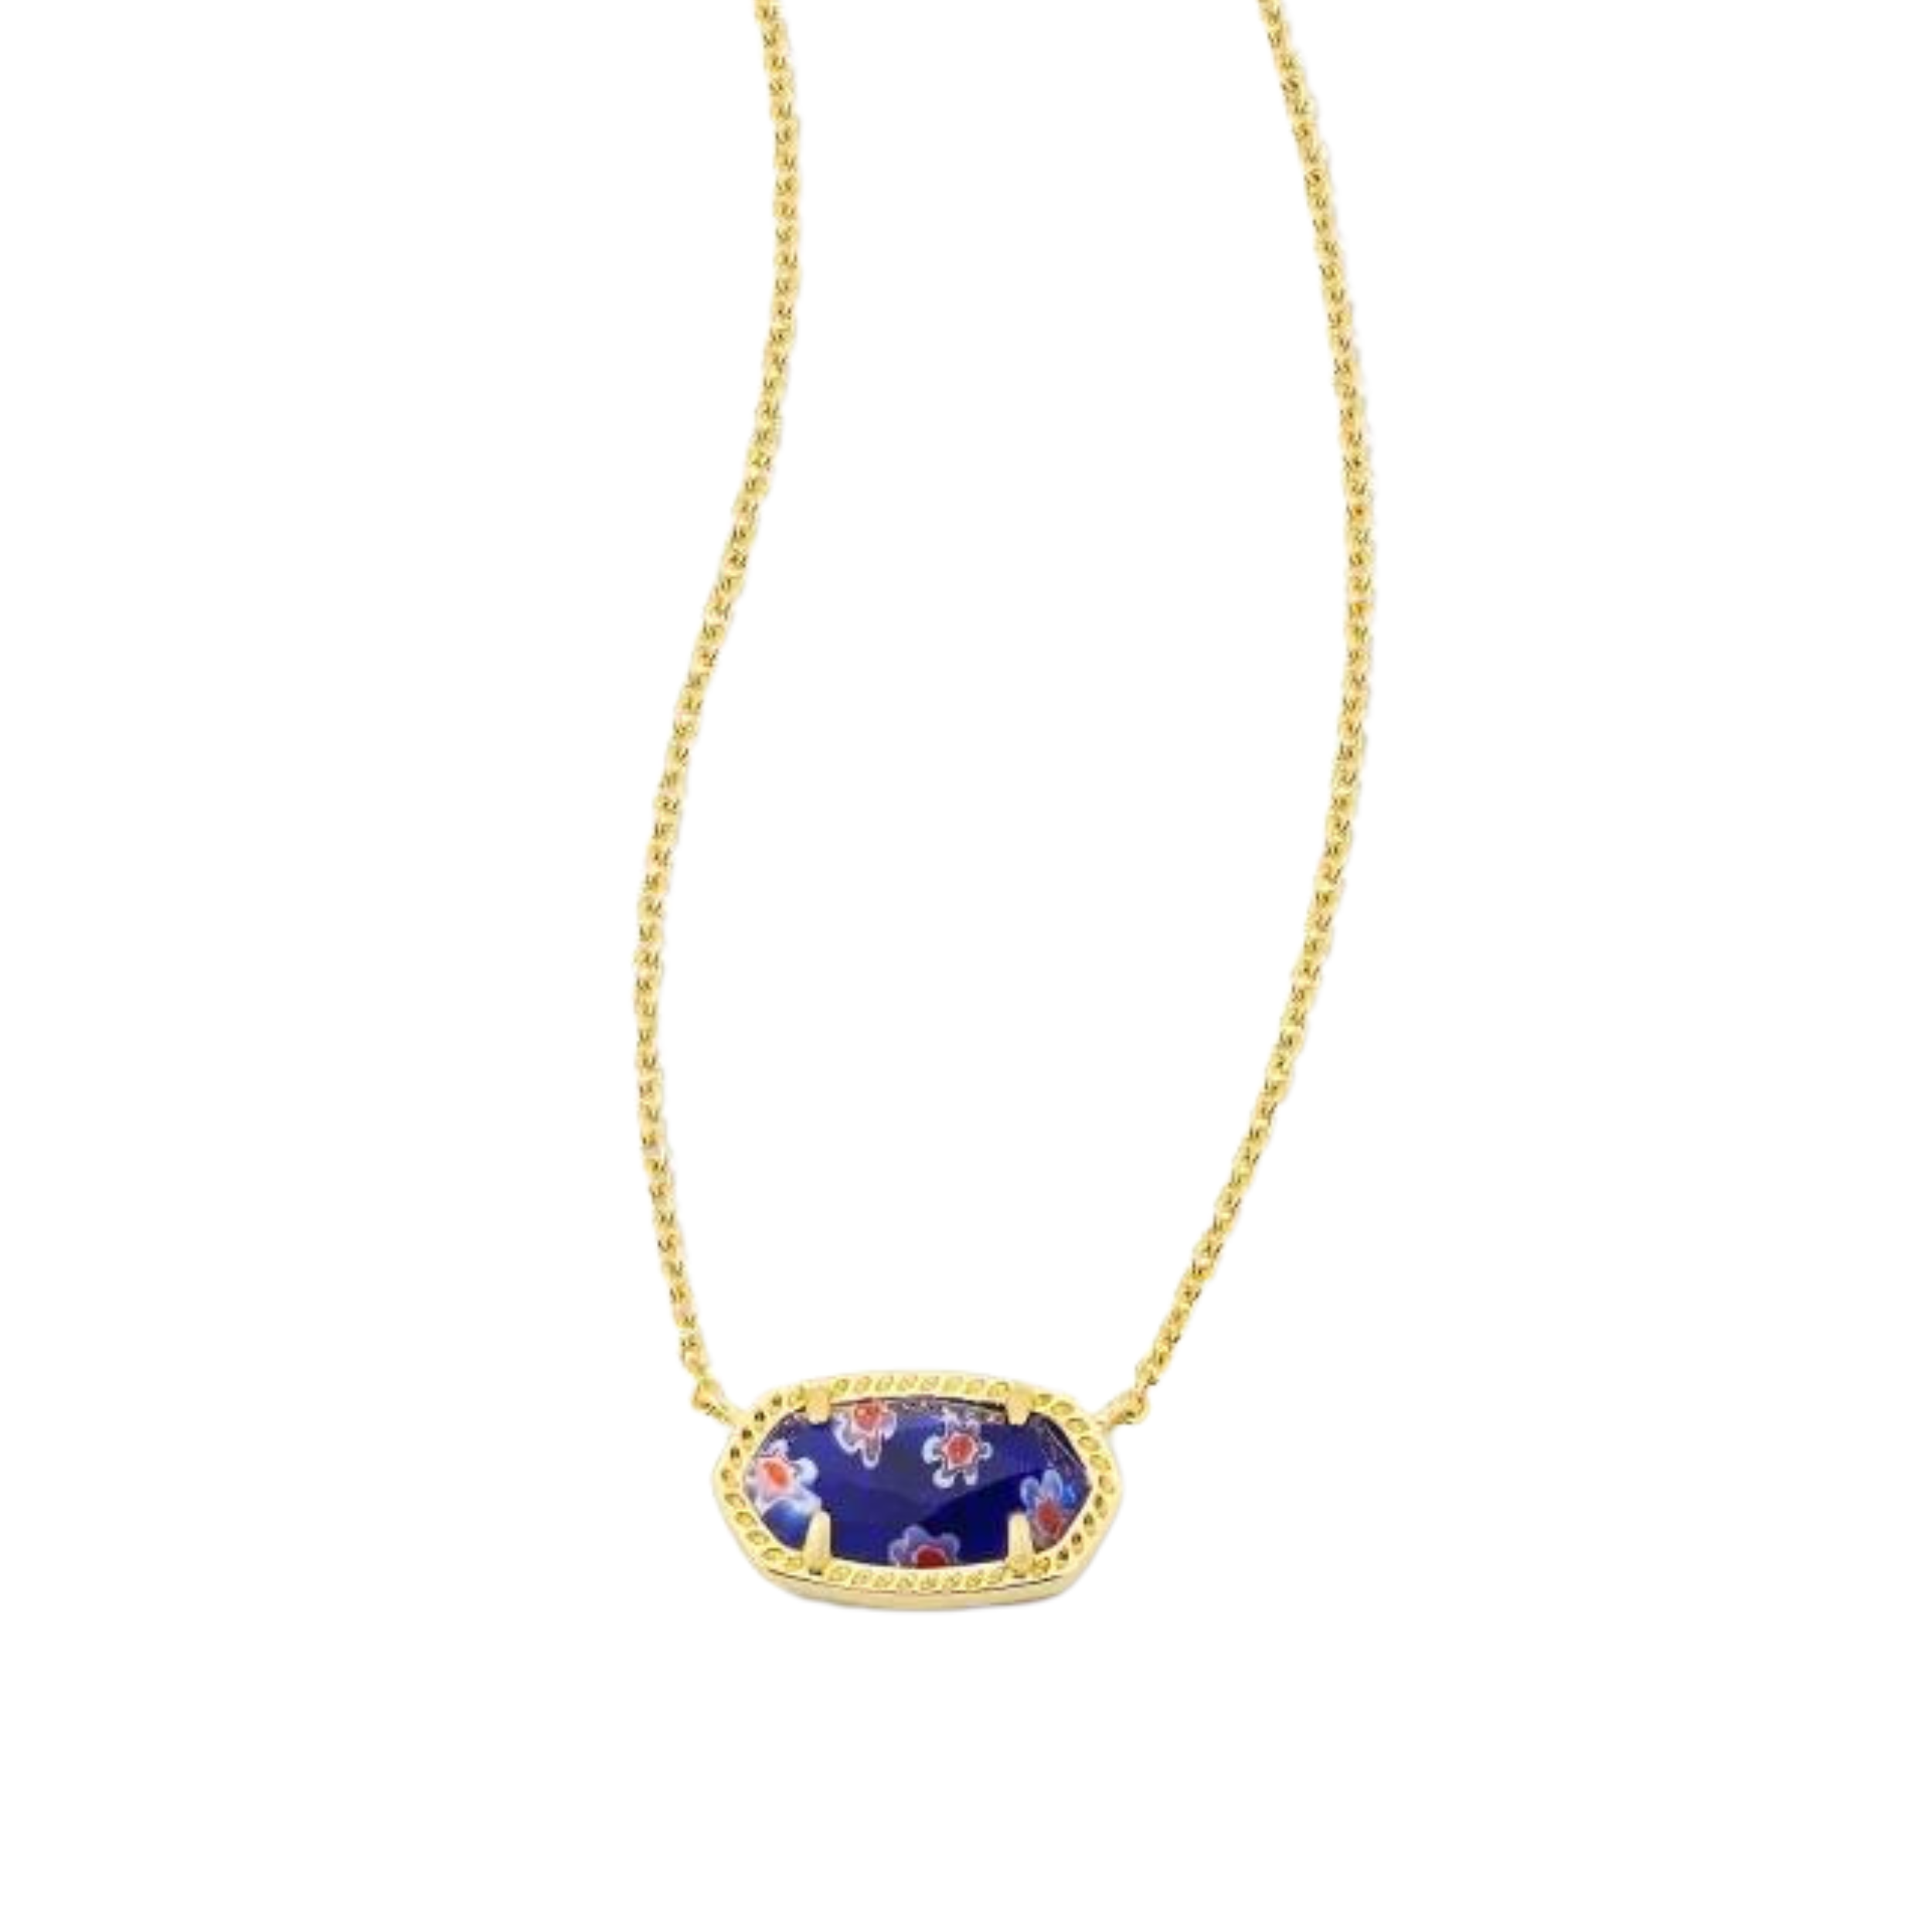 Pictured on a white background is a gold chain necklace with an oval pendant. This pendant has a gold outline with a cobalt blue inlay that includes flowers.  